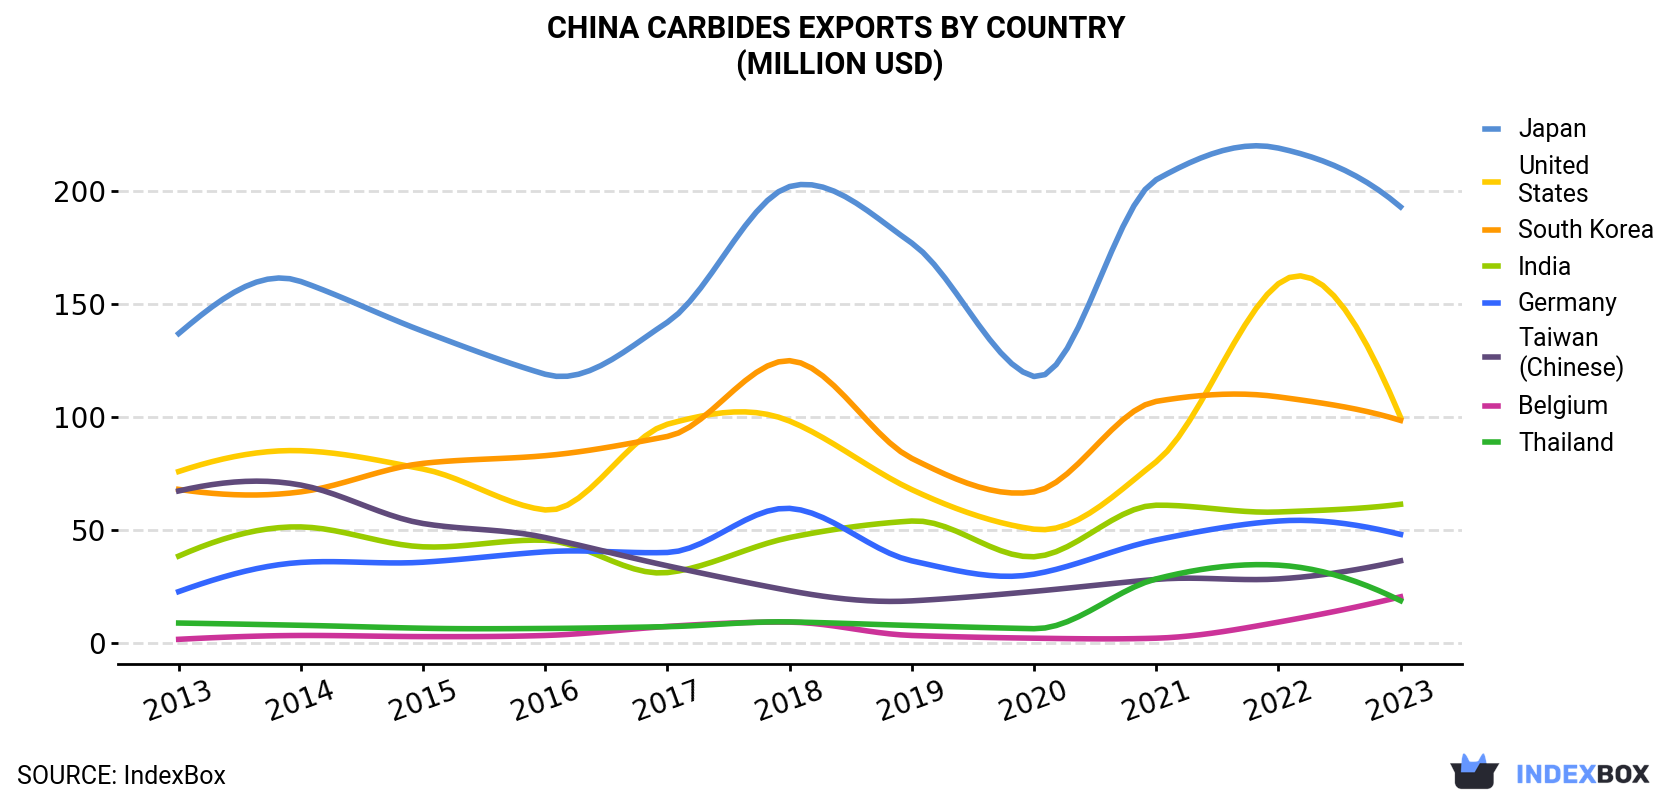 China Carbides Exports By Country (Million USD)